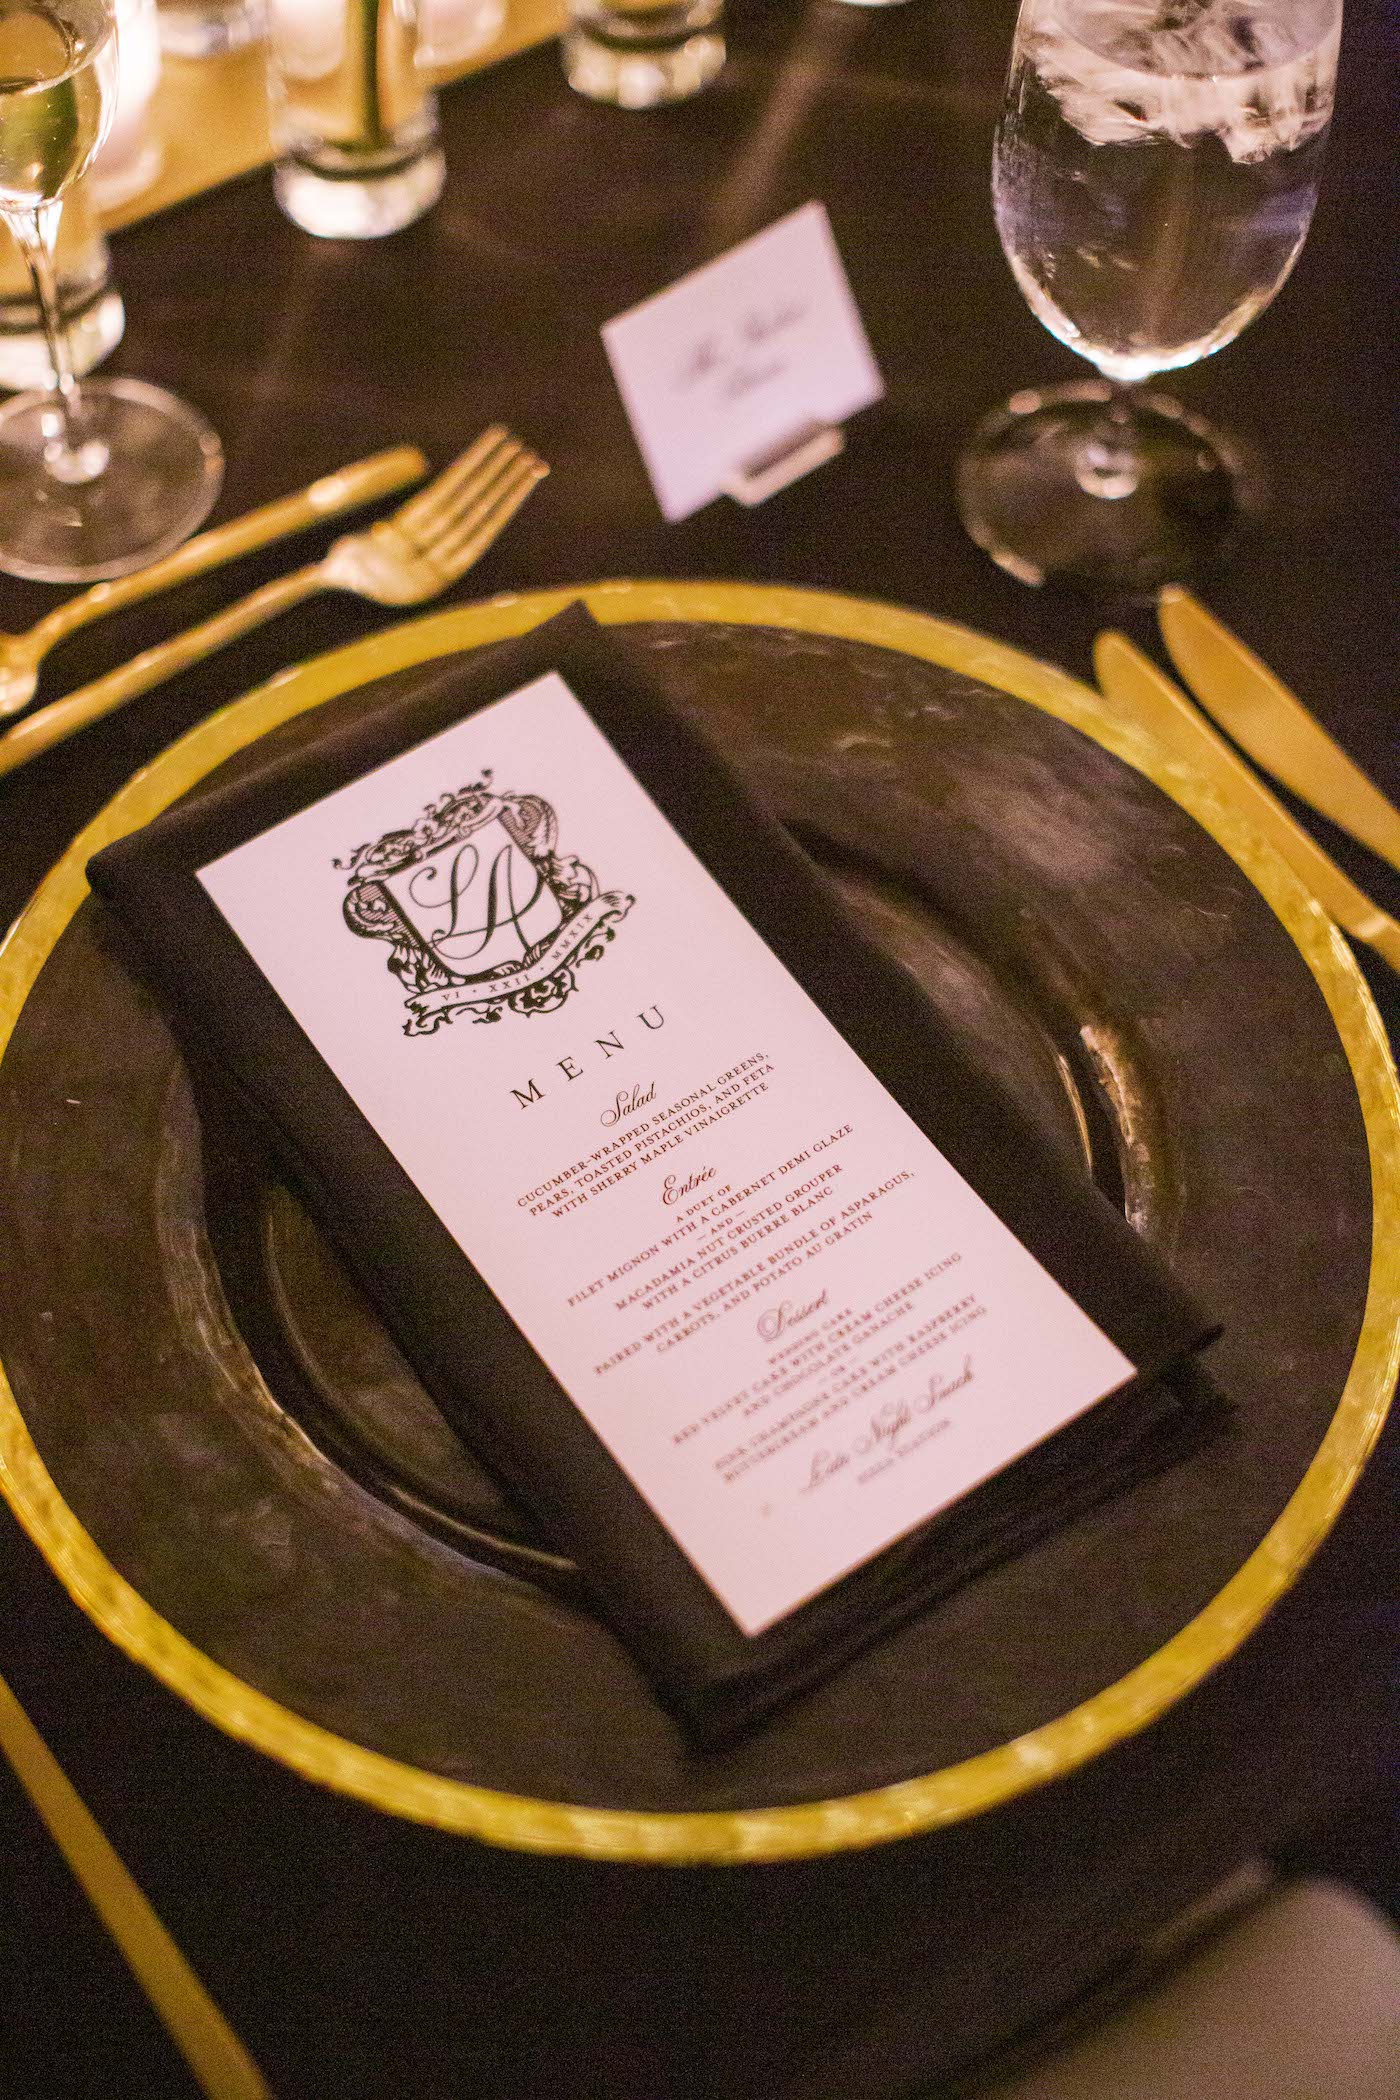 Classic Black, White, and Gold Wedding Reception Place Setting Ideas | Tampa Bay Planner Parties A La Carte